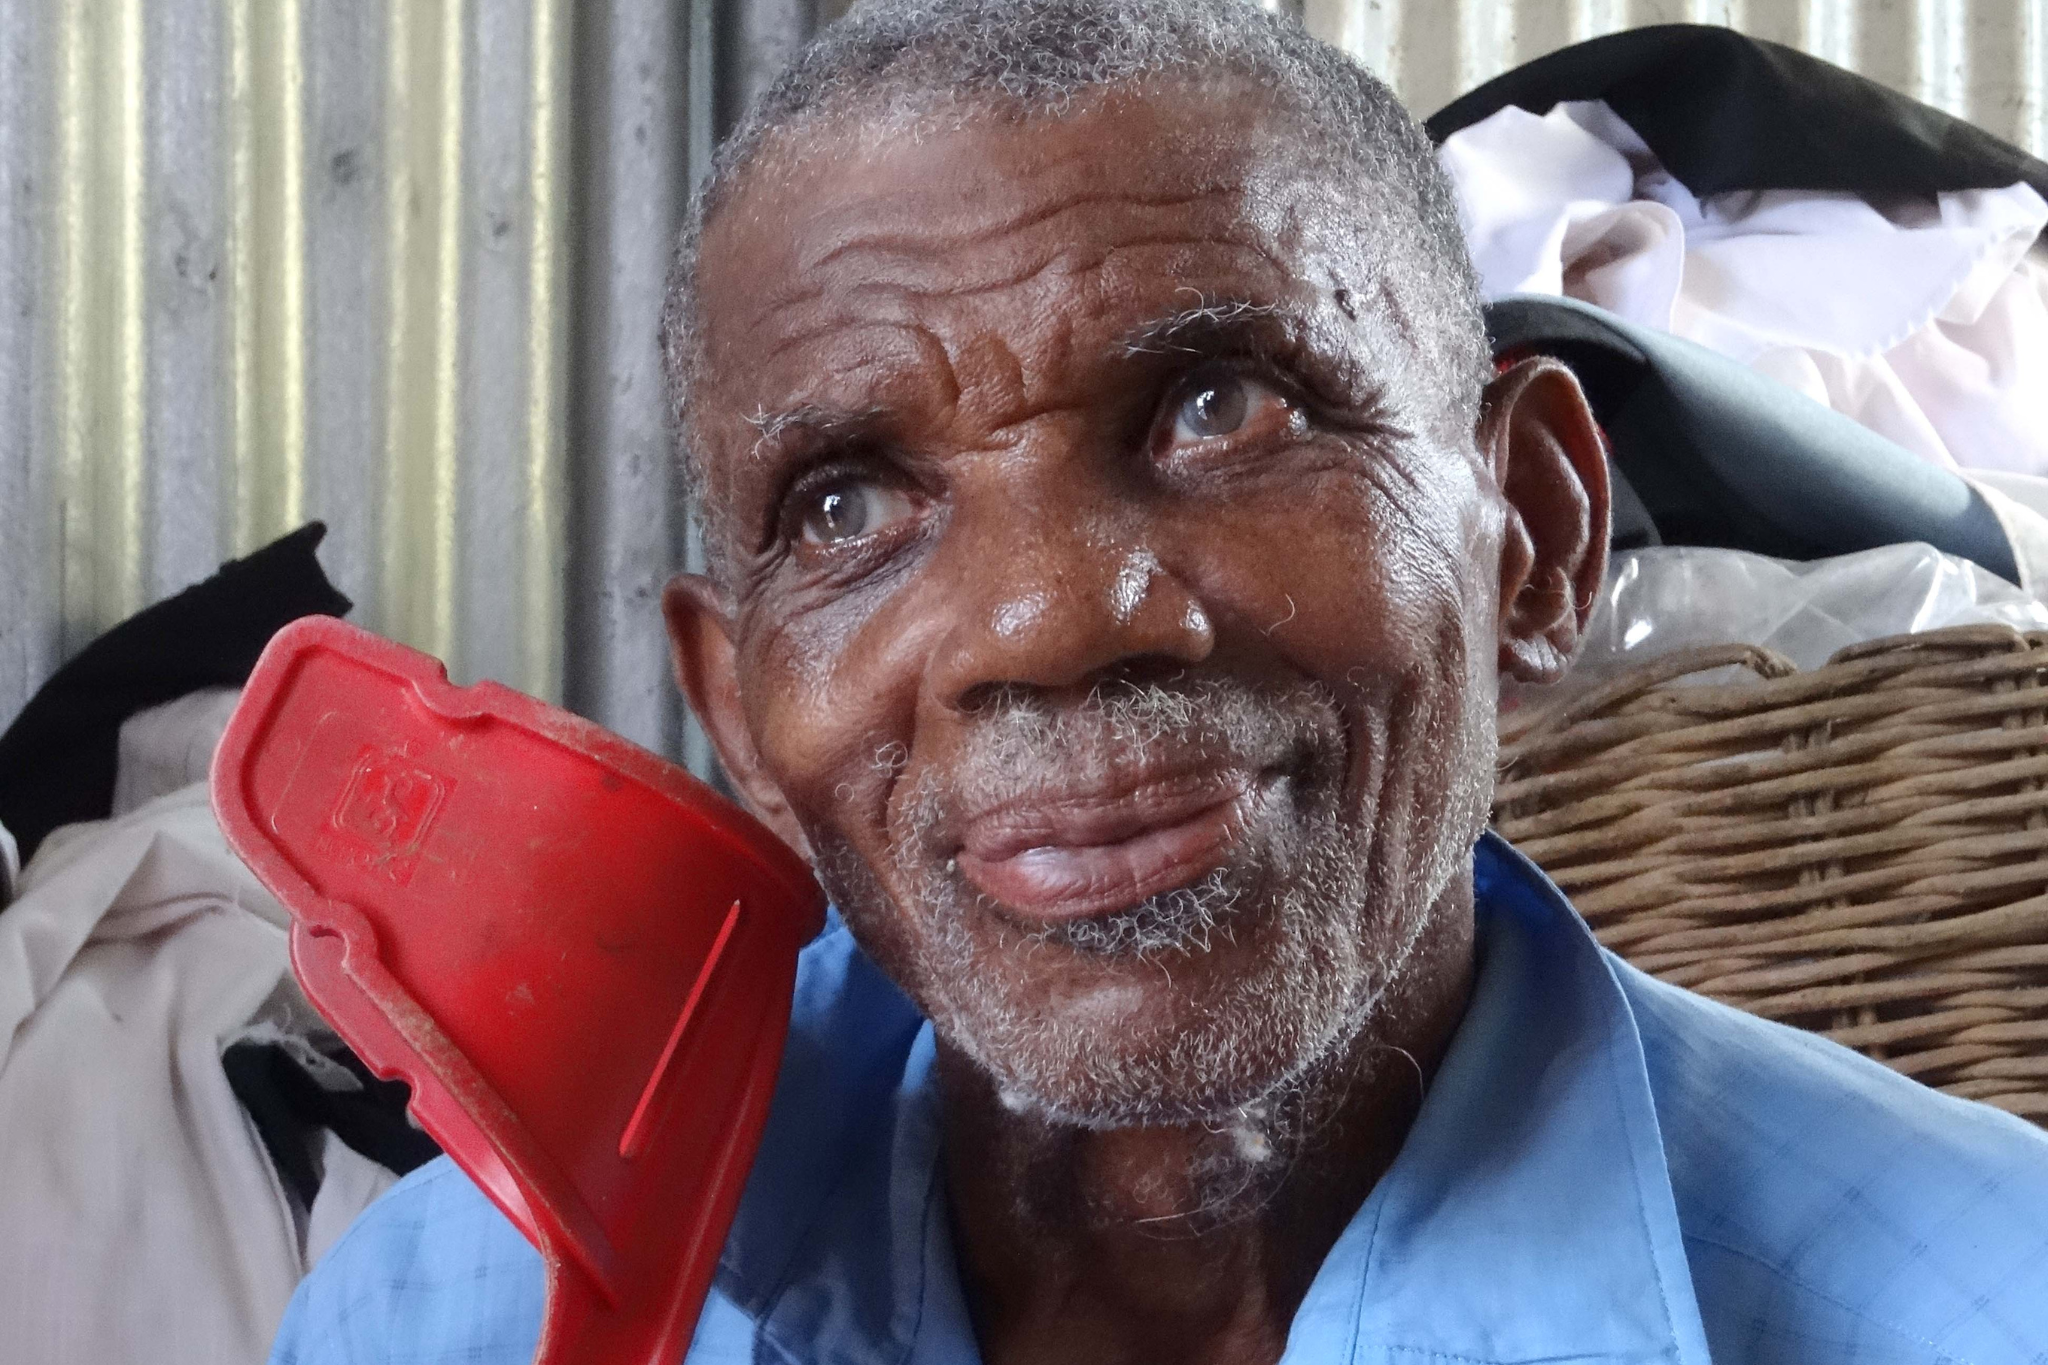 A man from Dominica receiving aid from ShelterBox